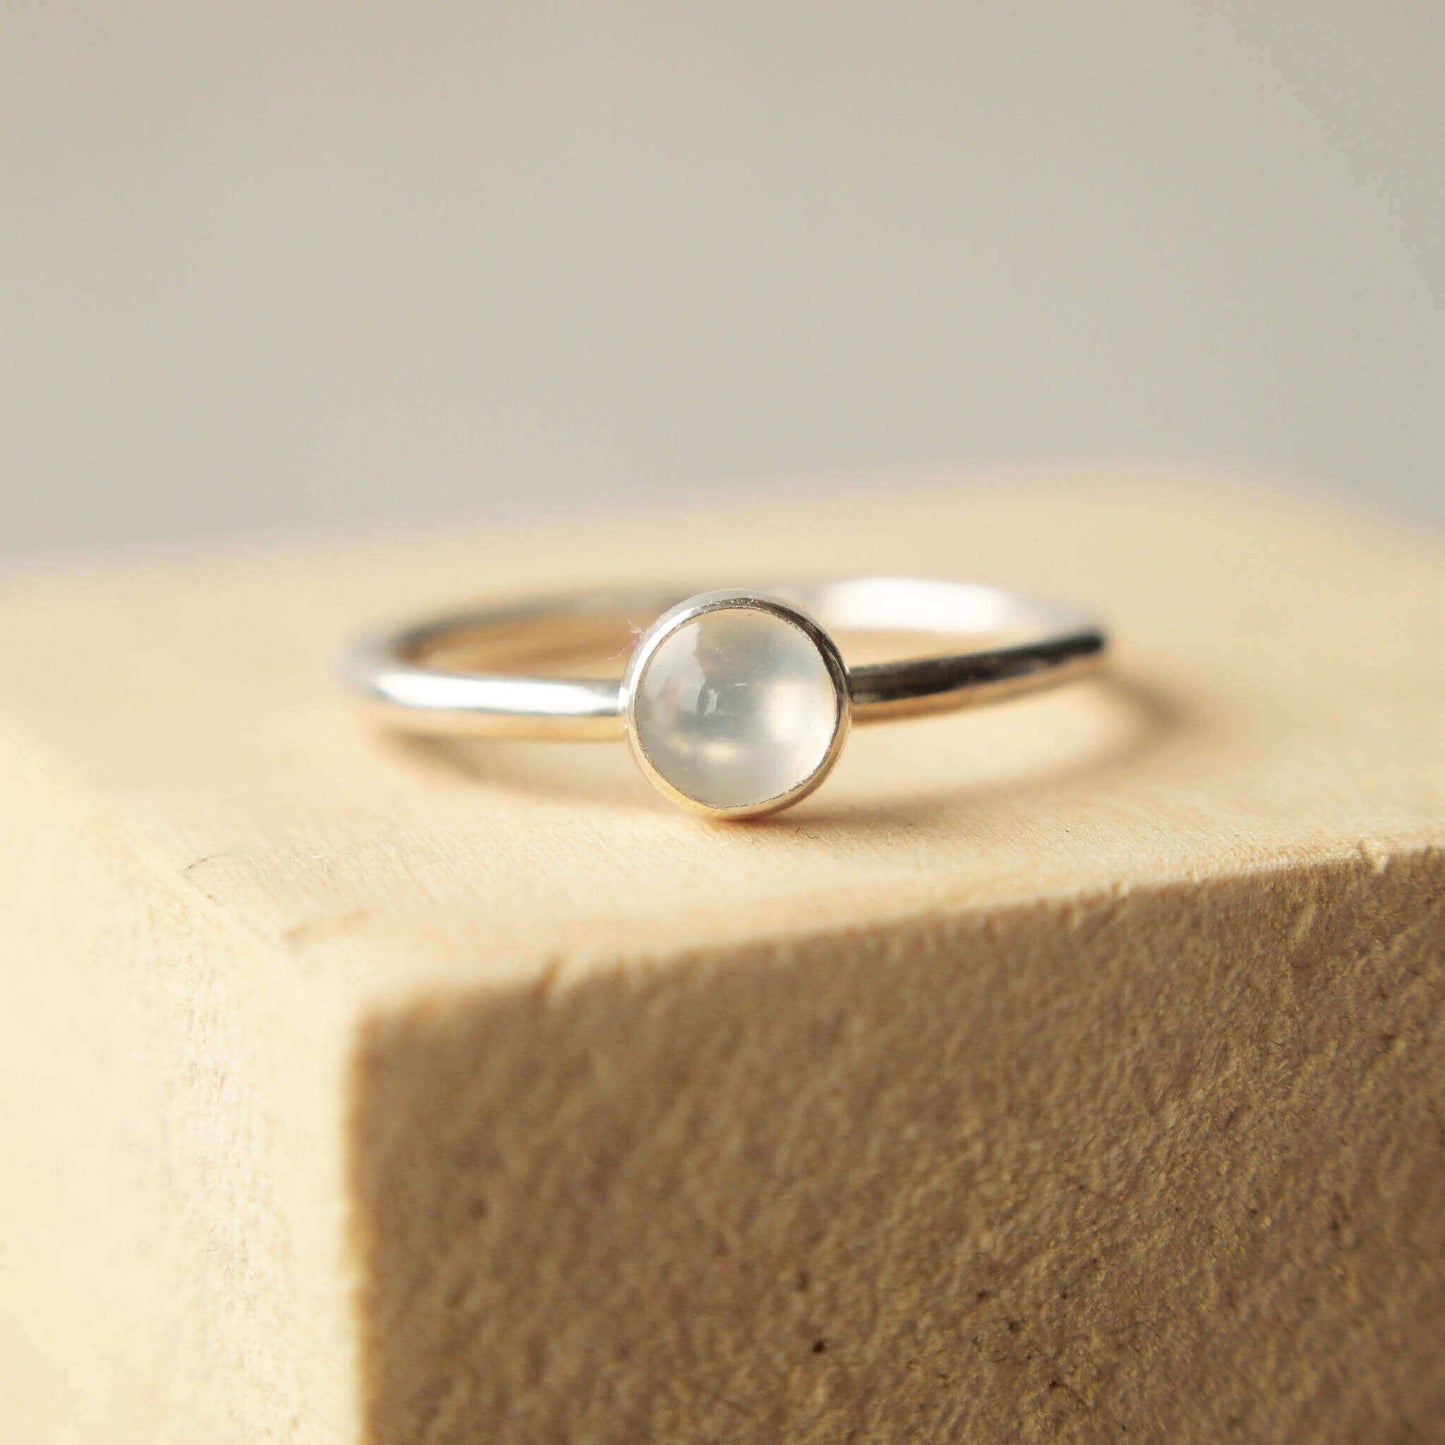 Sterling silver and moonstone cabochon ring. 5 mm sized milky white cabochon stone on a fully round band of sterling silver. Handmade in Scotland by maram jewellery